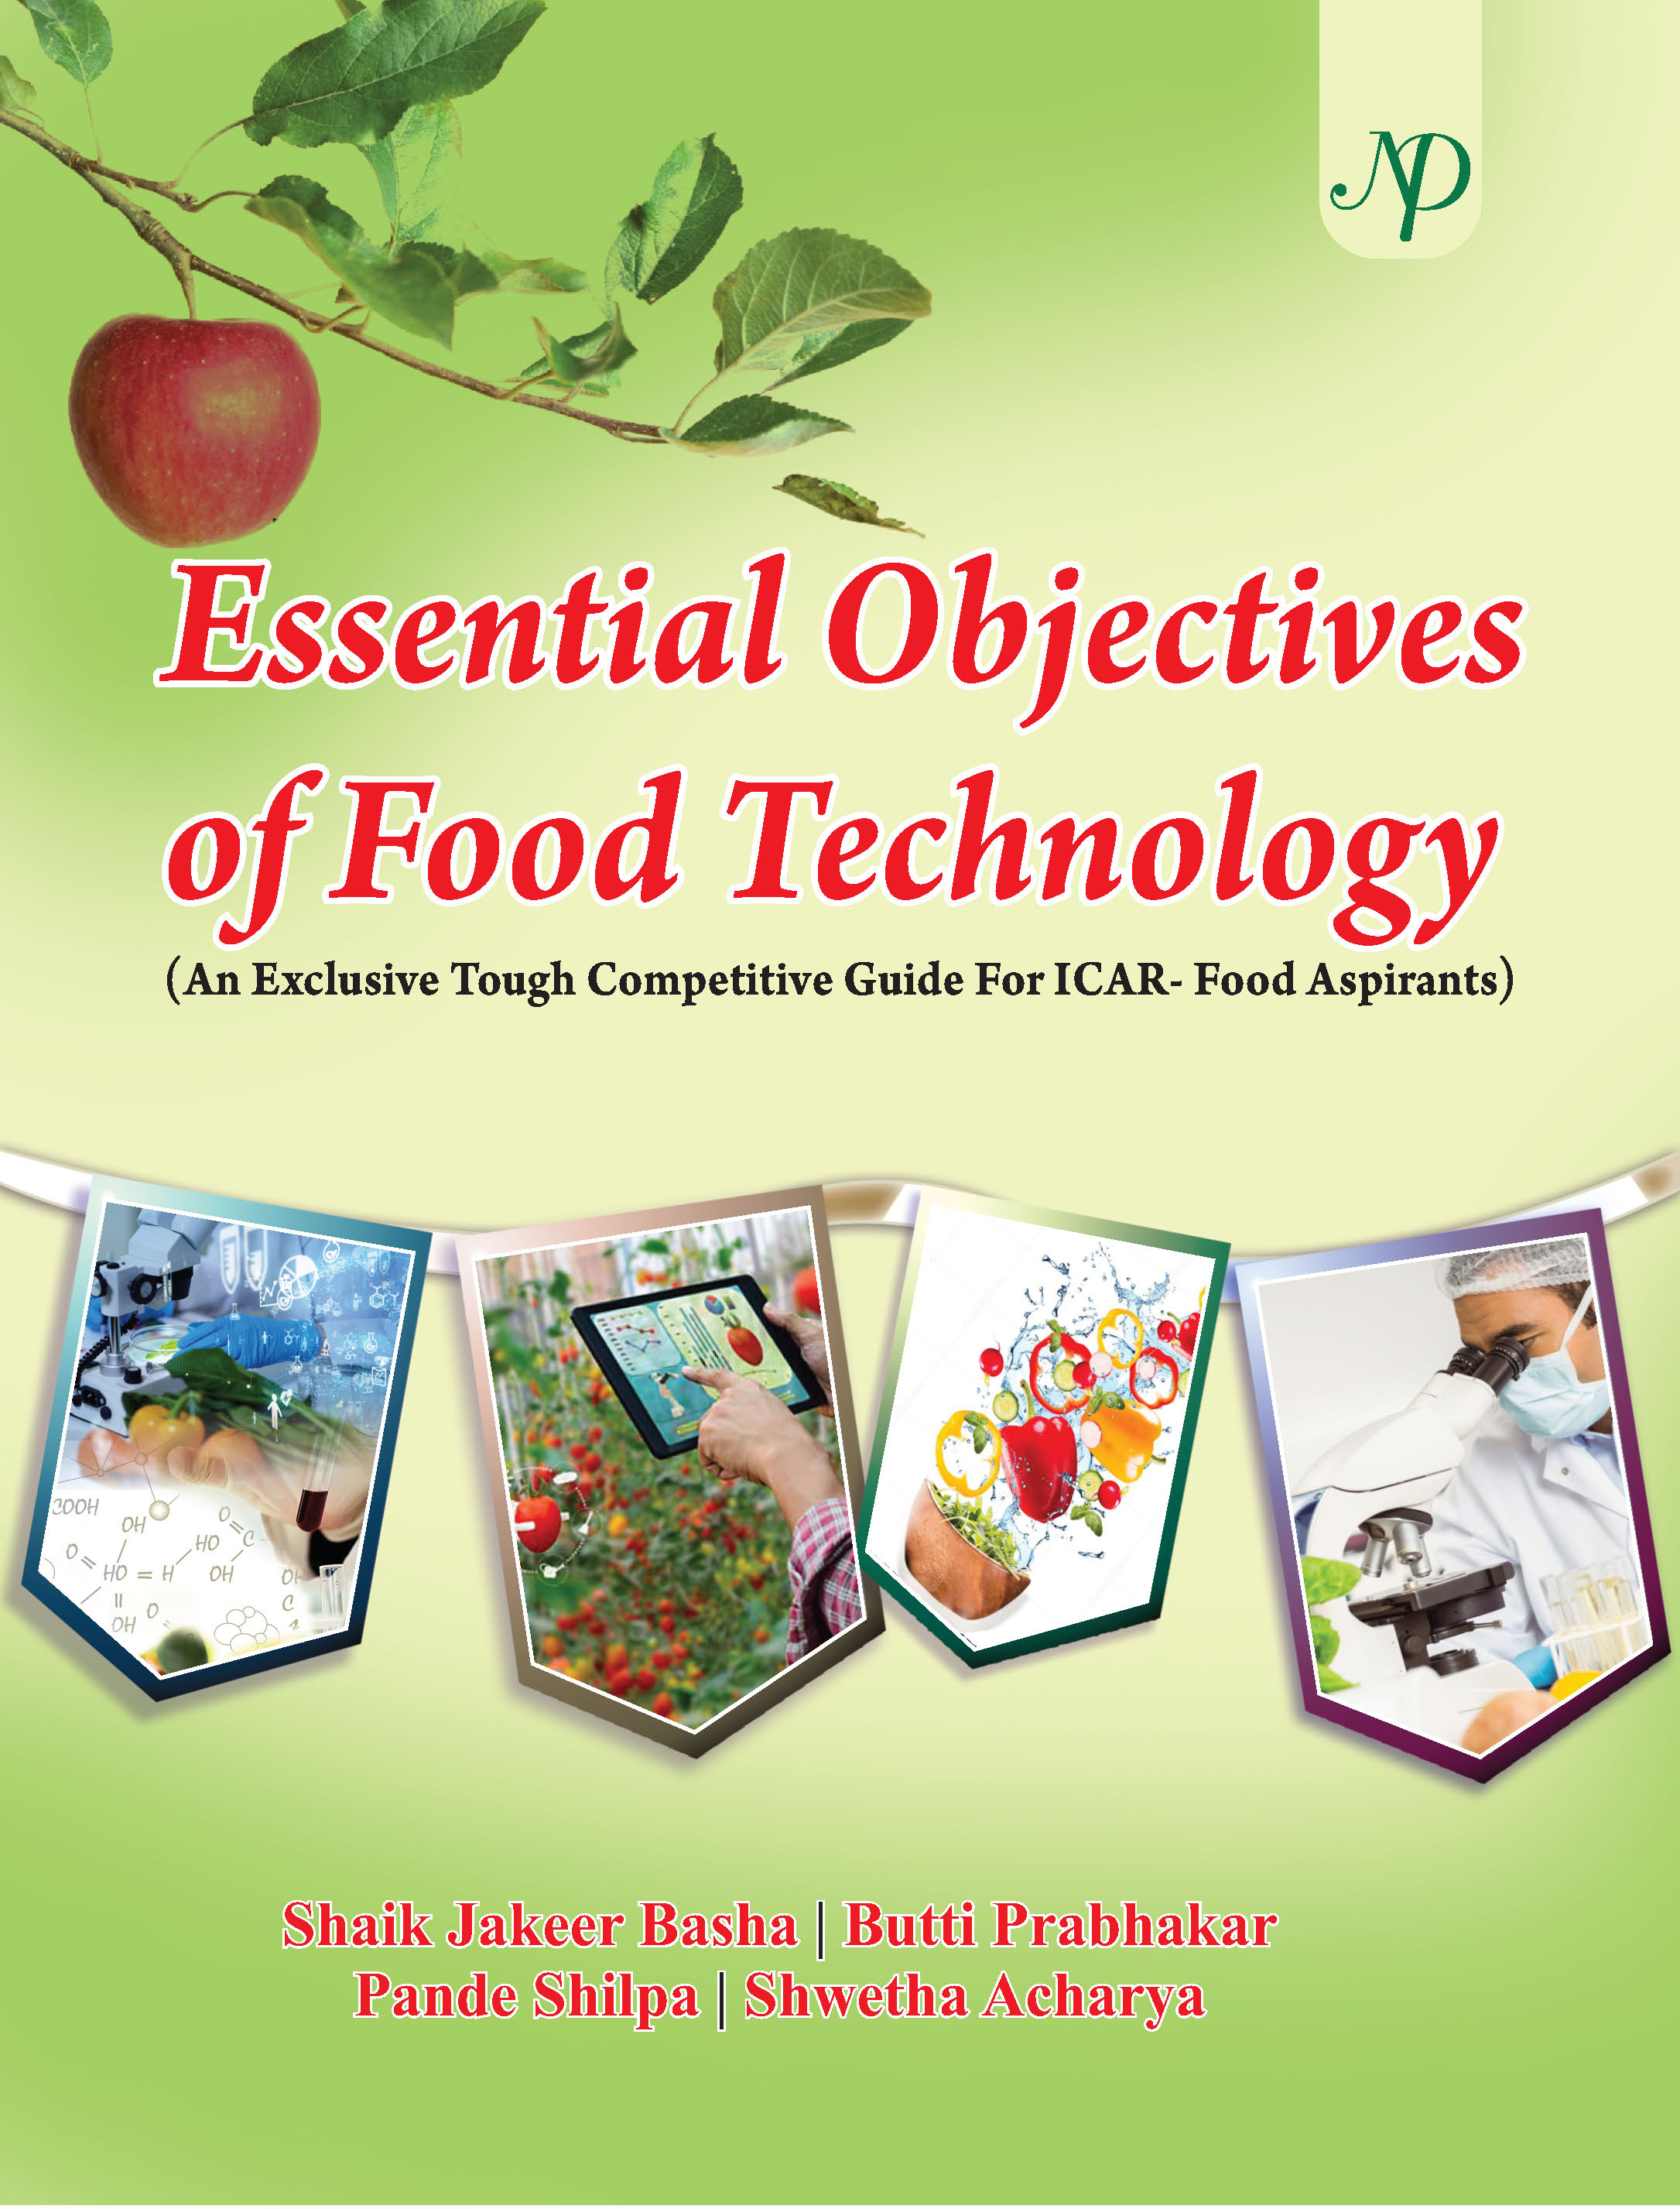 Essential Objectives of Food Technology Cover.jpg